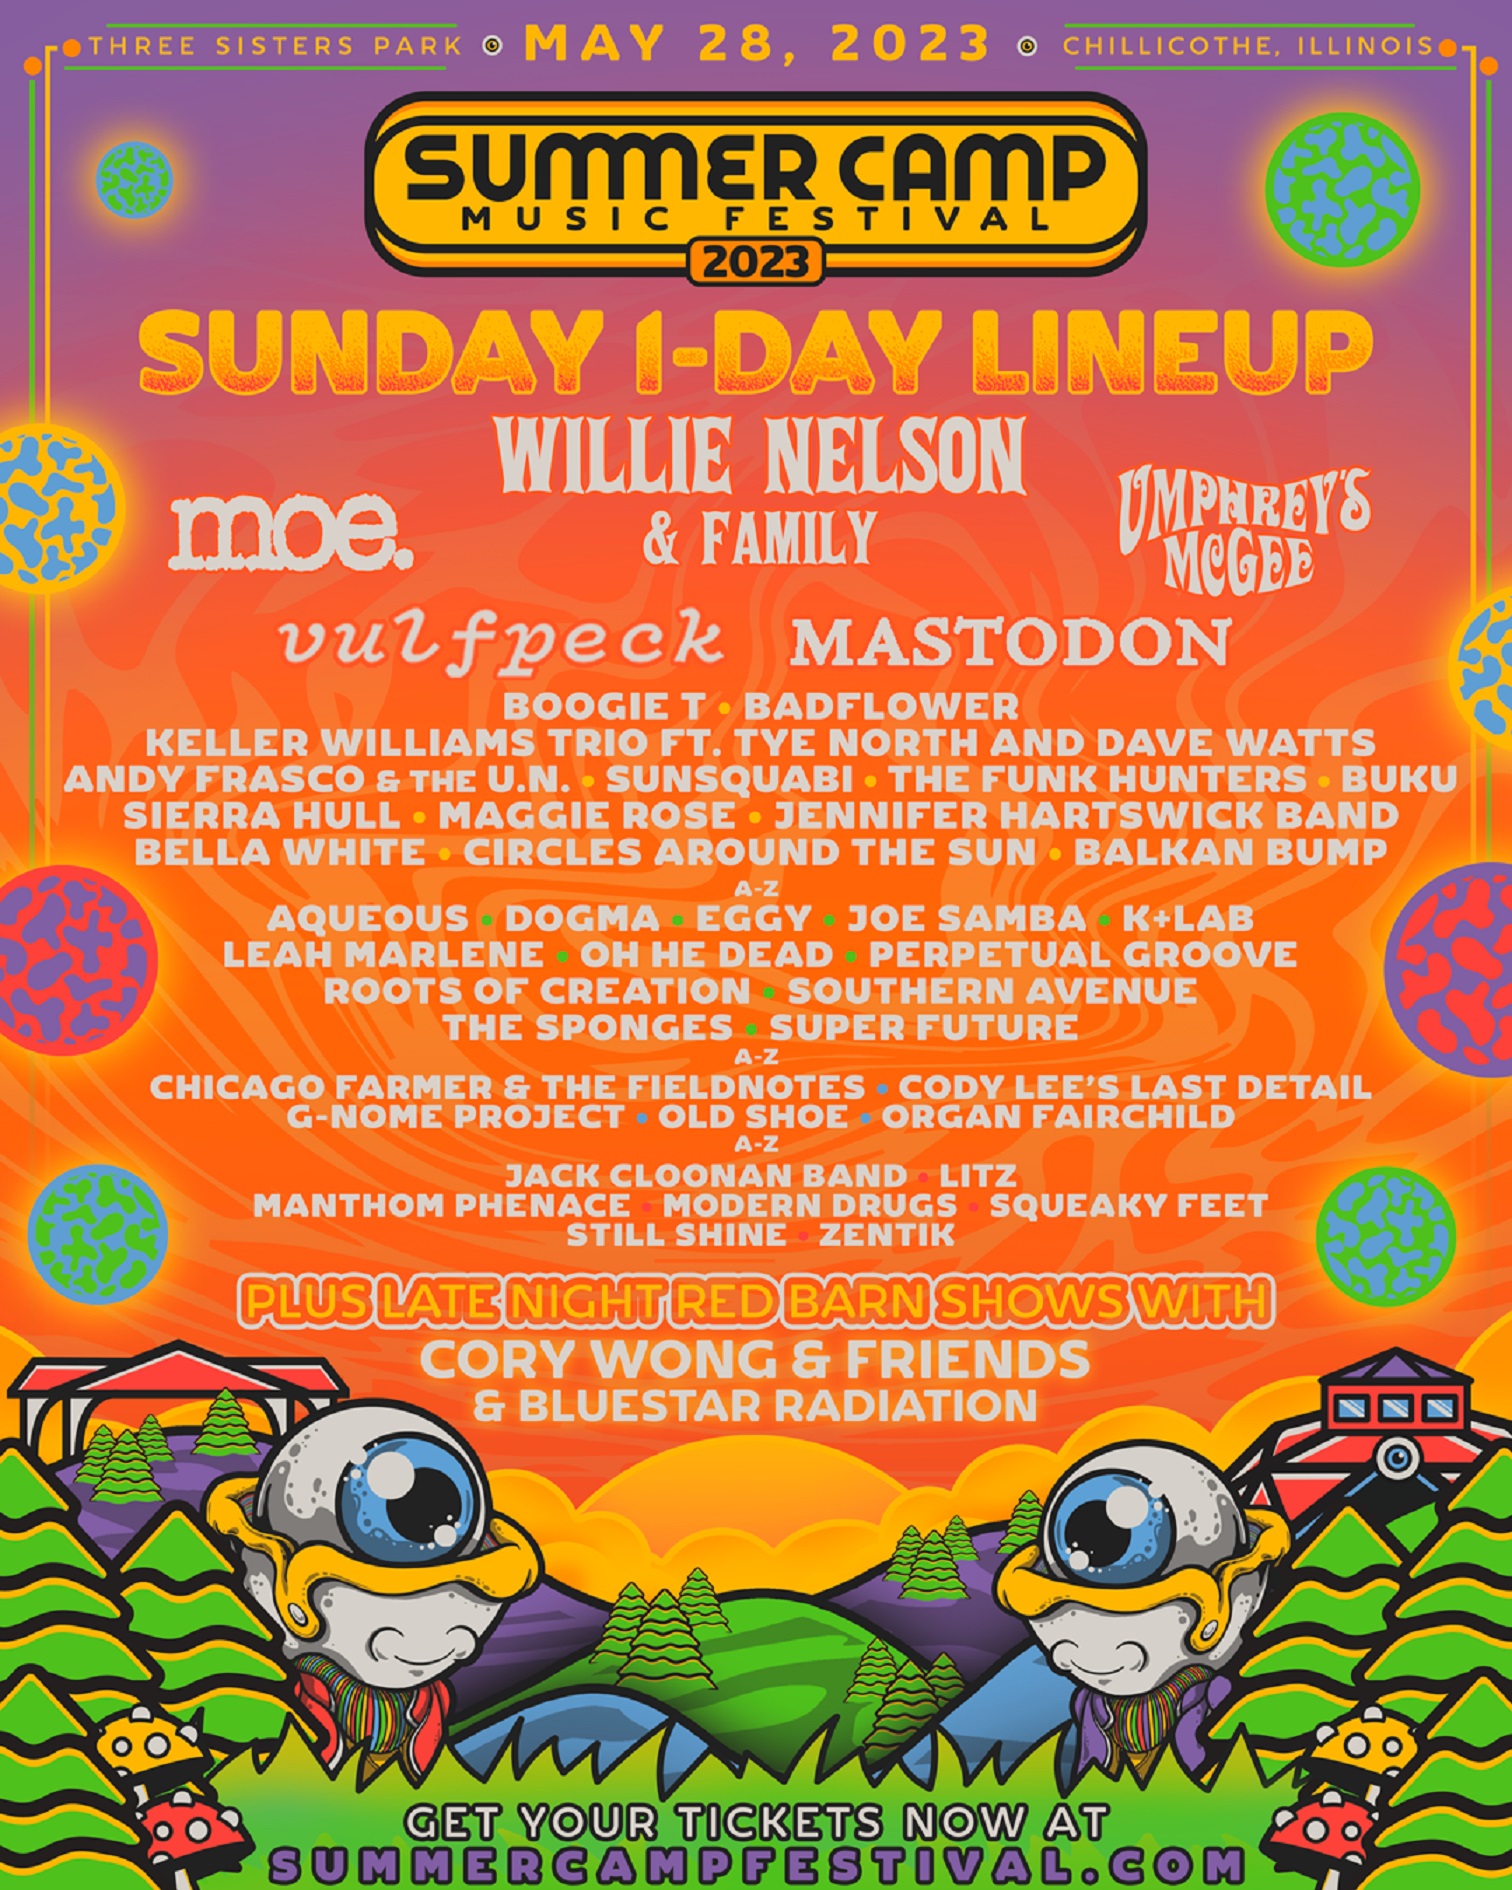 Summer Camp Music Festival is proud to present the Sunday 1Day lineup